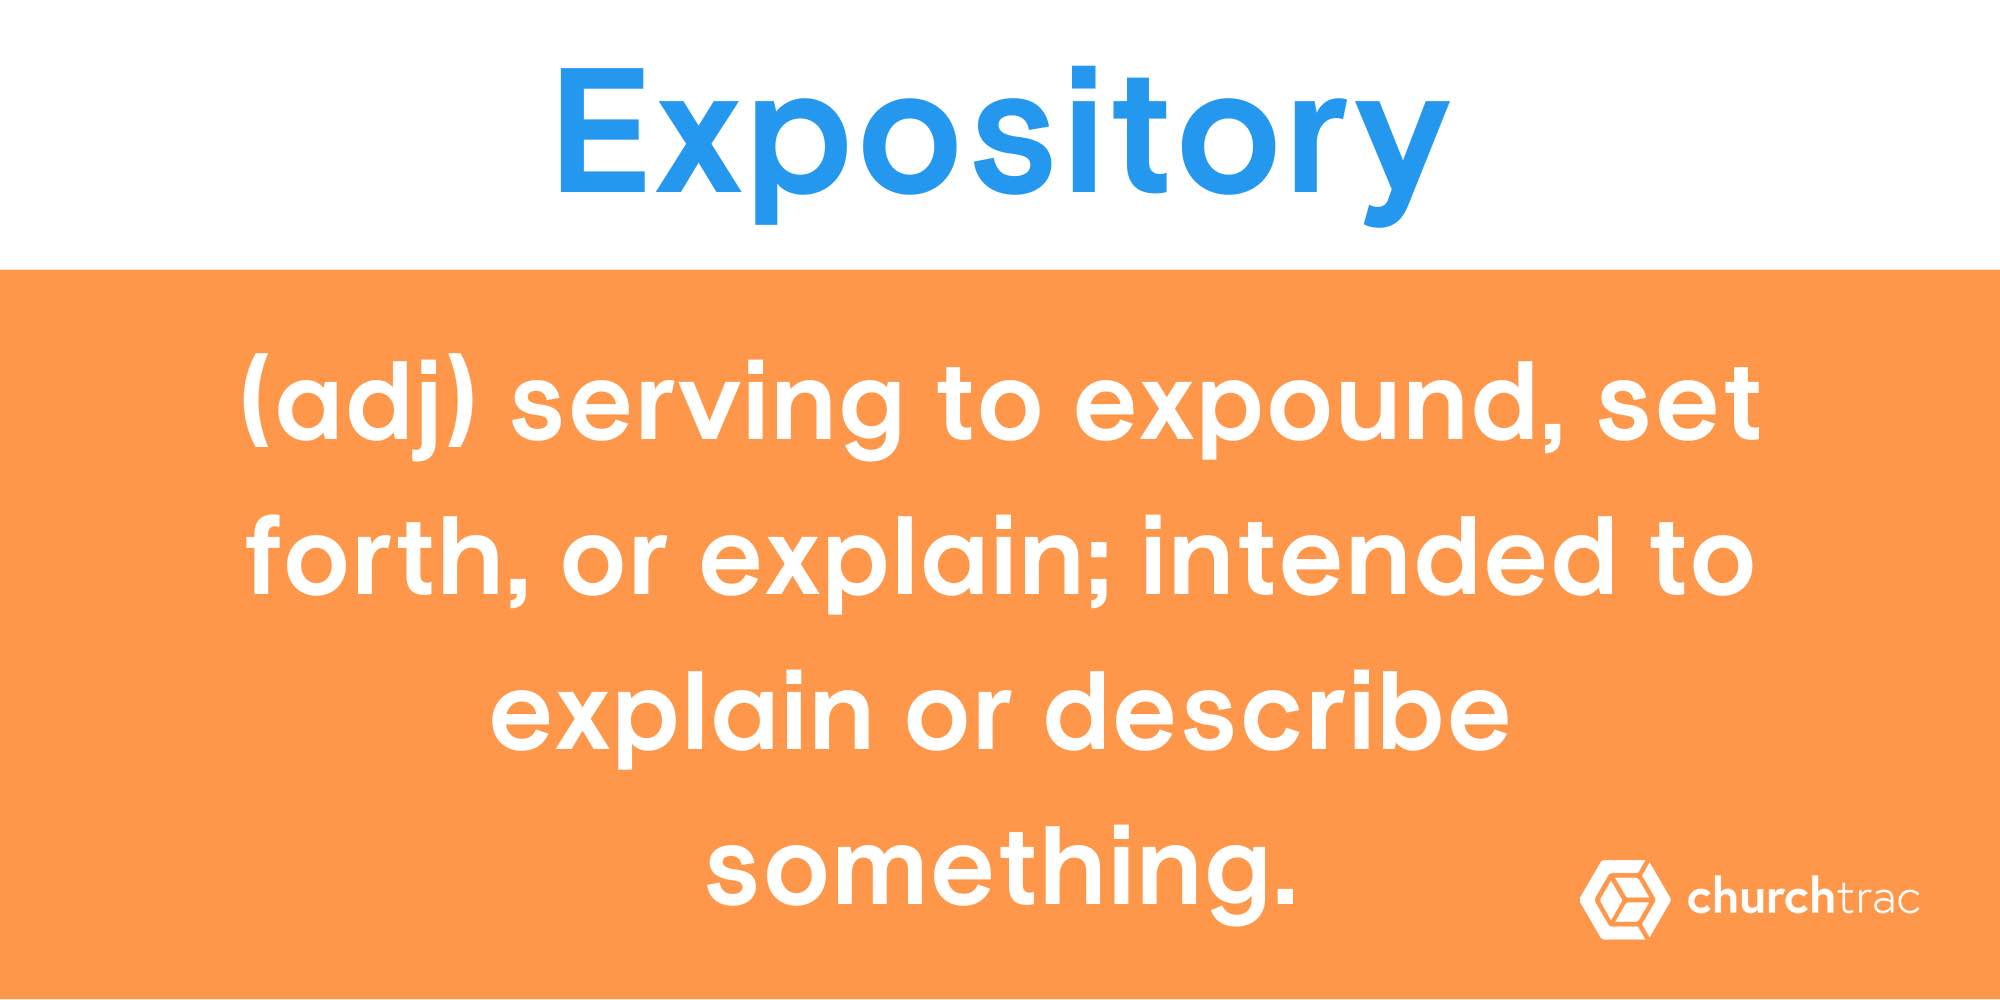 The definitions of expository preaching, expository preaching definitions, define expositional preaching